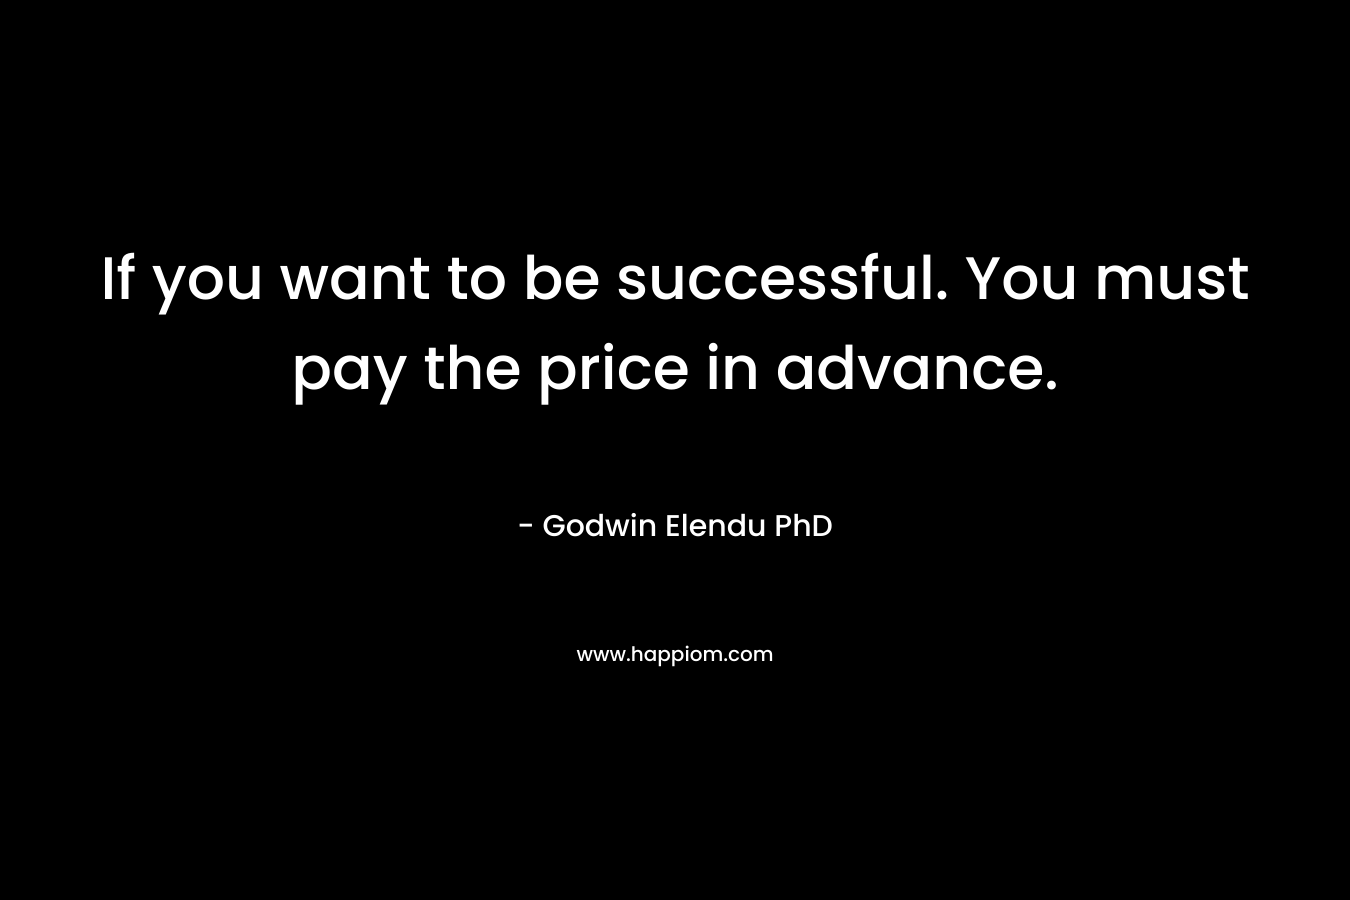 If you want to be successful. You must pay the price in advance.